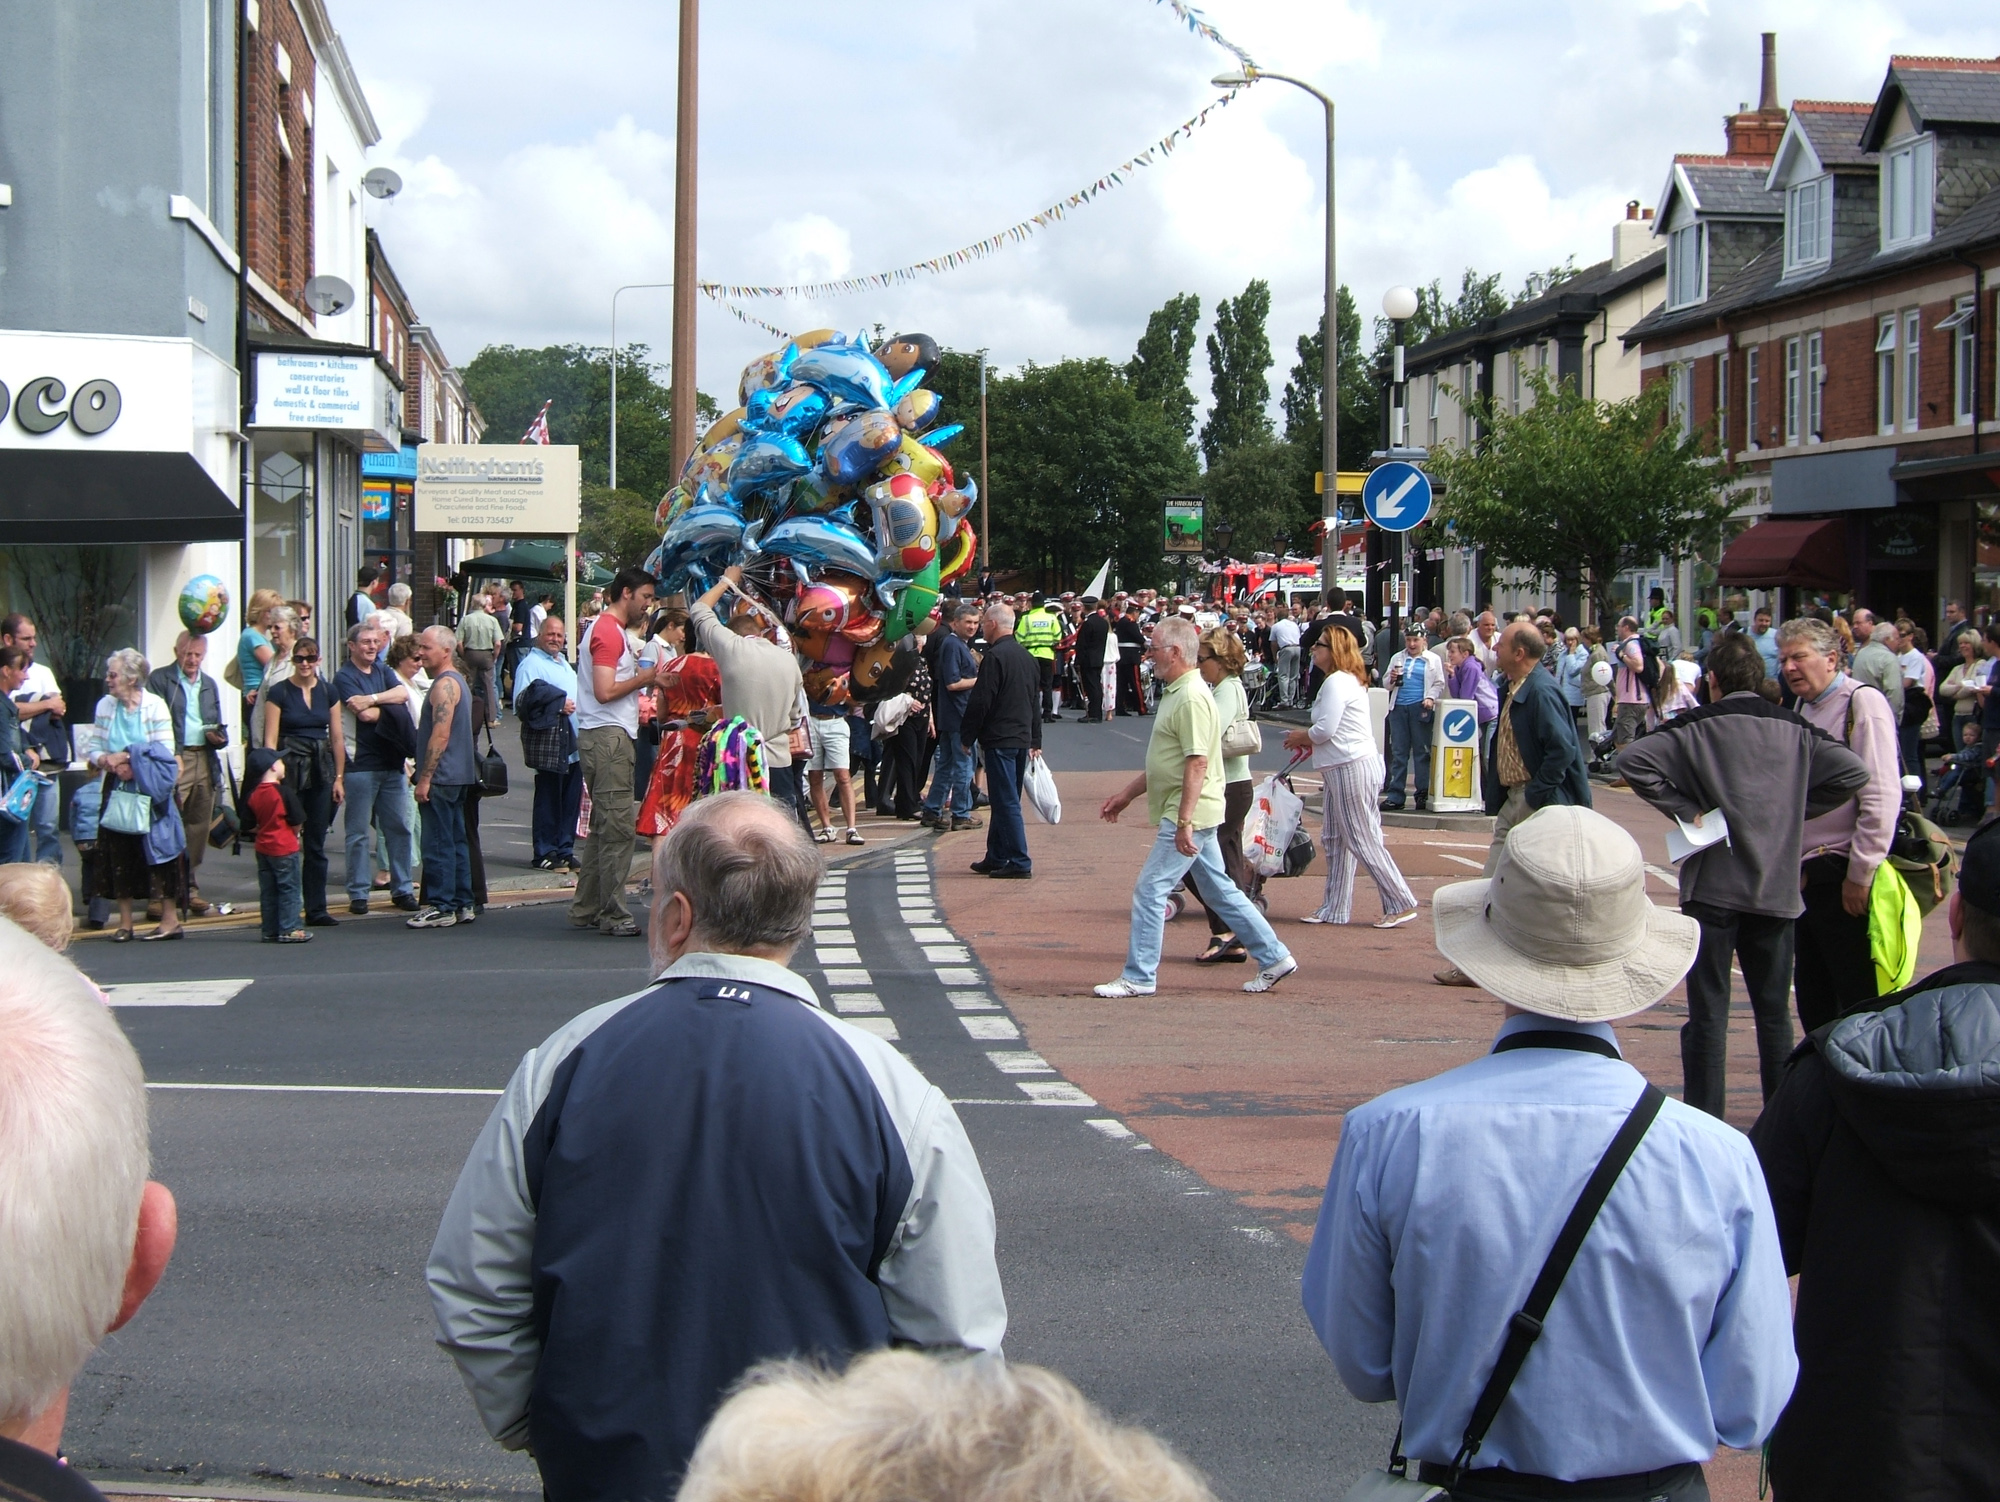 several large balloons float in the air while people walk on the sidewalk